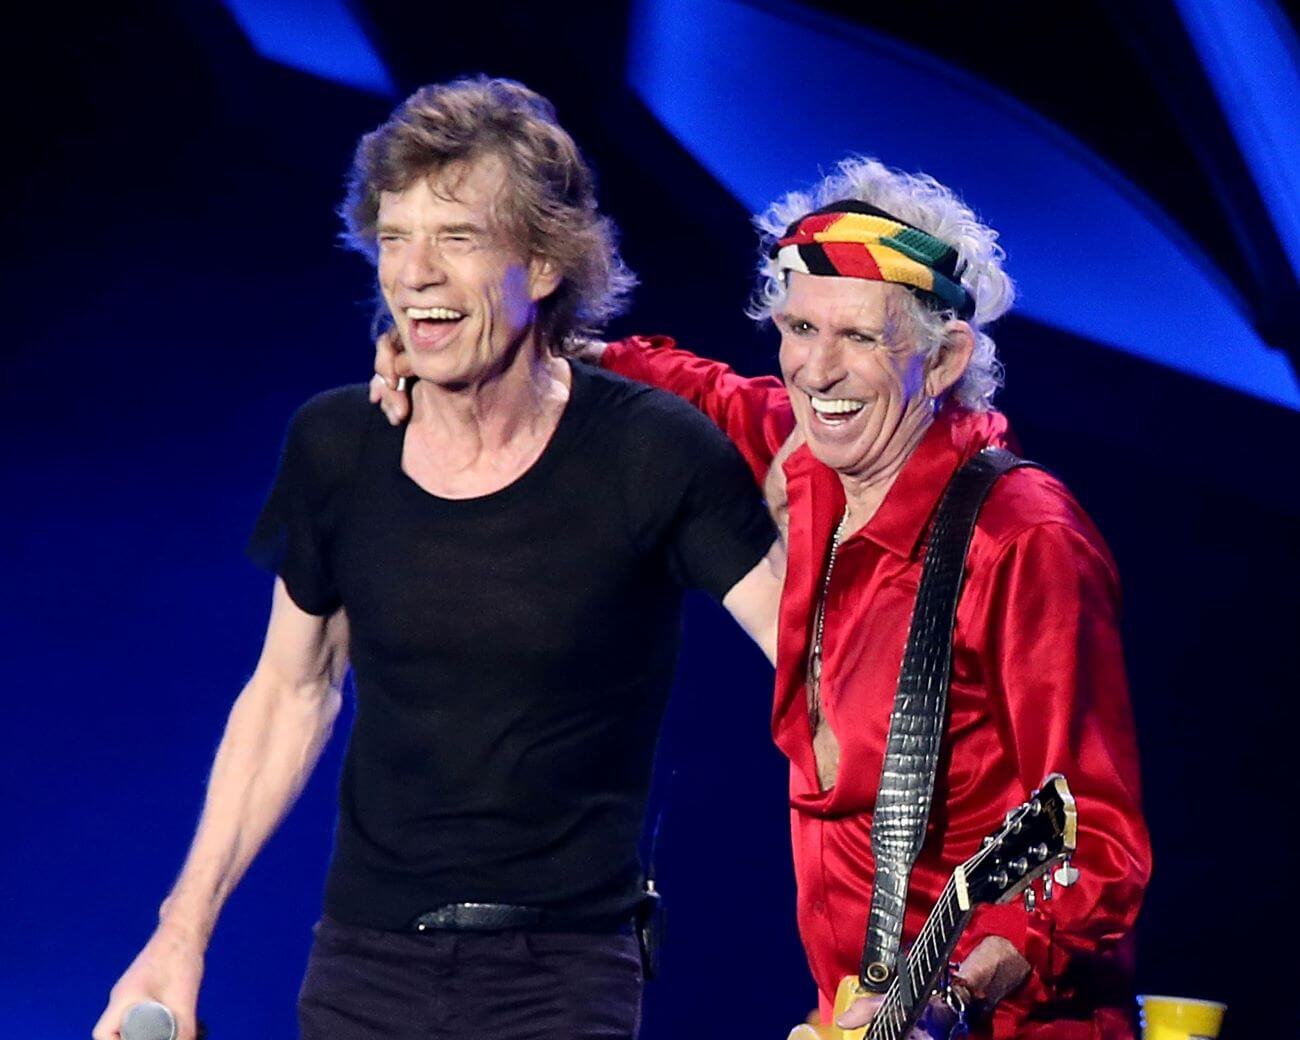 Keith Richards stands with his arm around Mick Jagger's shoulders. Jagger holds a microphone and Richards holds a guitar. 